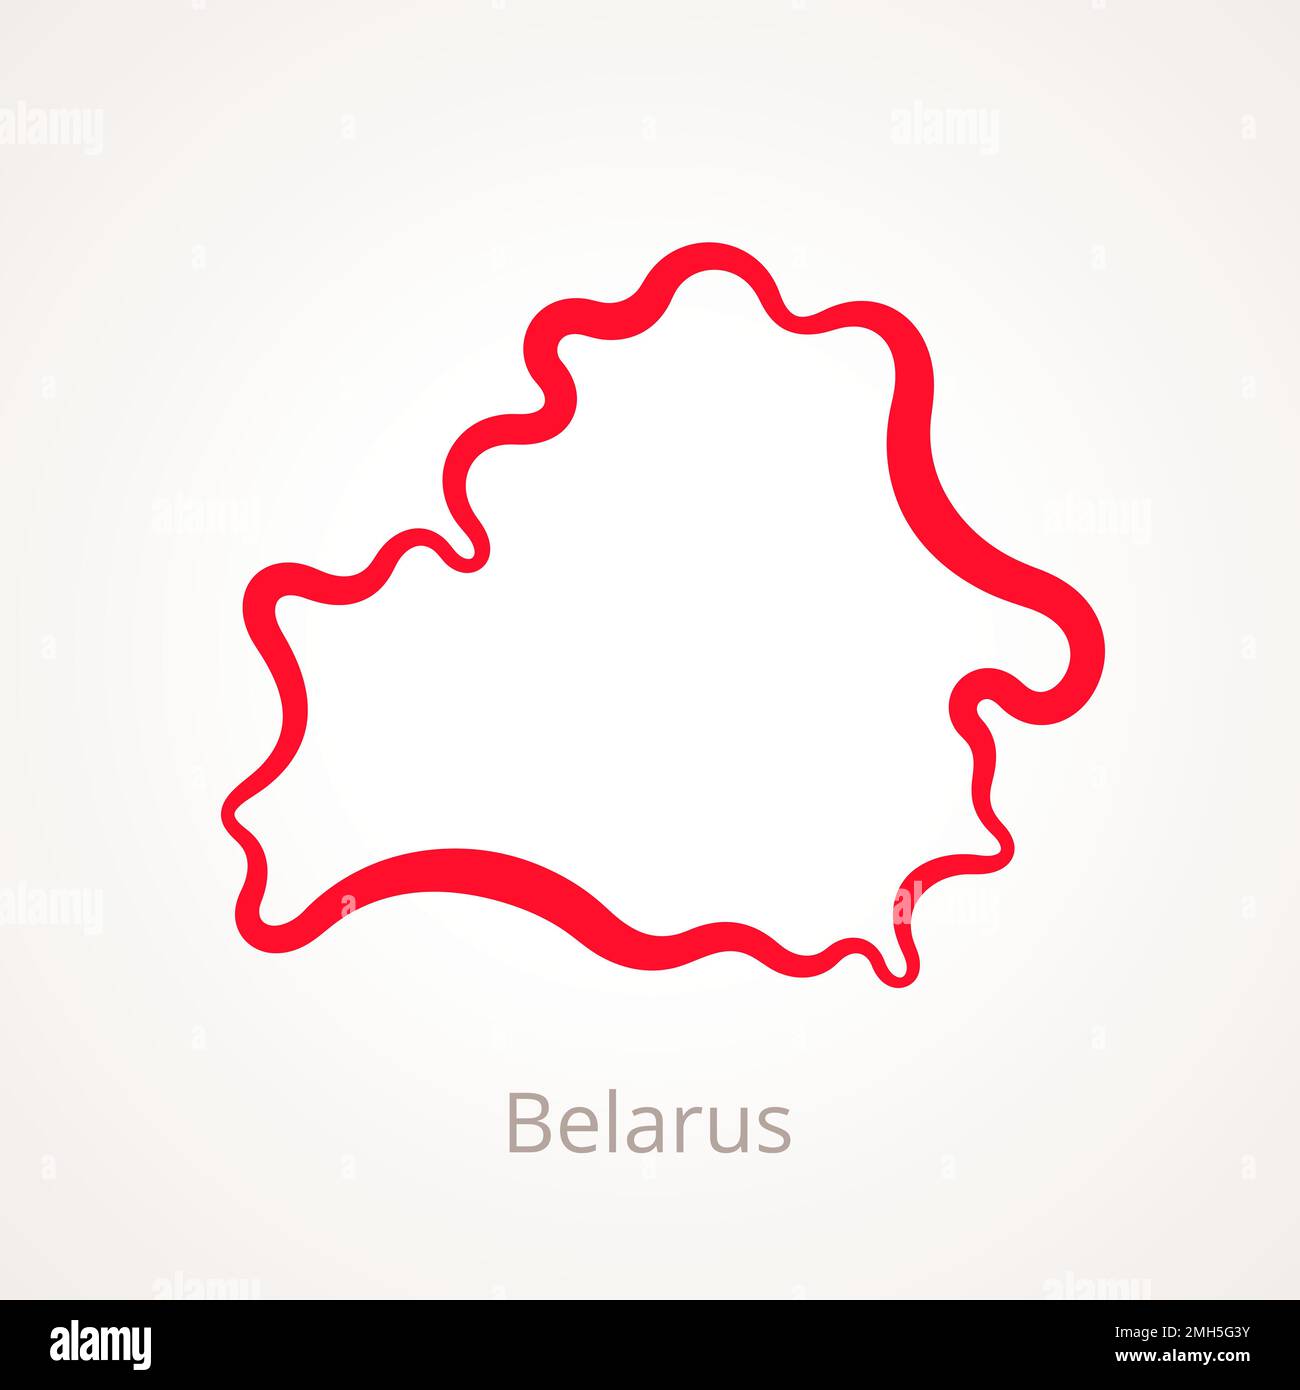 Outline map of Belarus marked with red line. Stock Vector